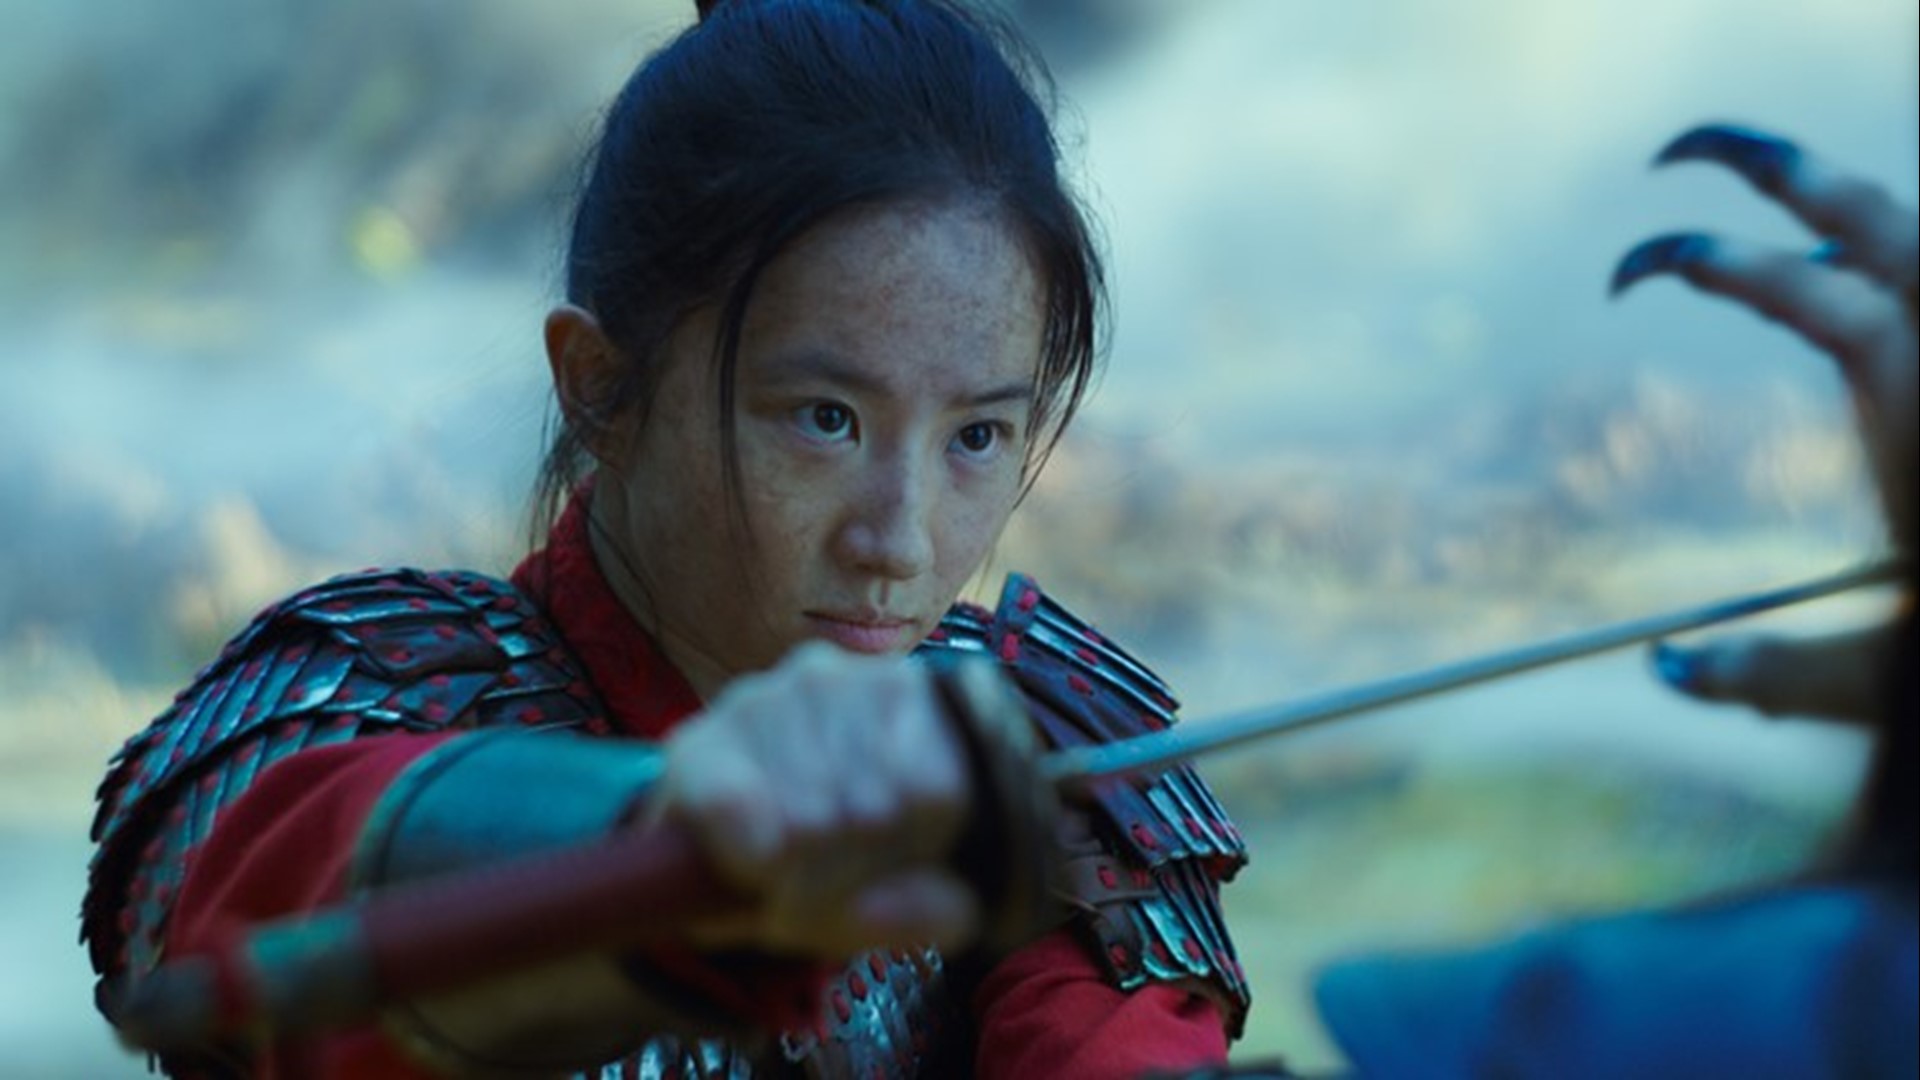 'Mulan' gets down to business in new trailer for Disney's live-action movie